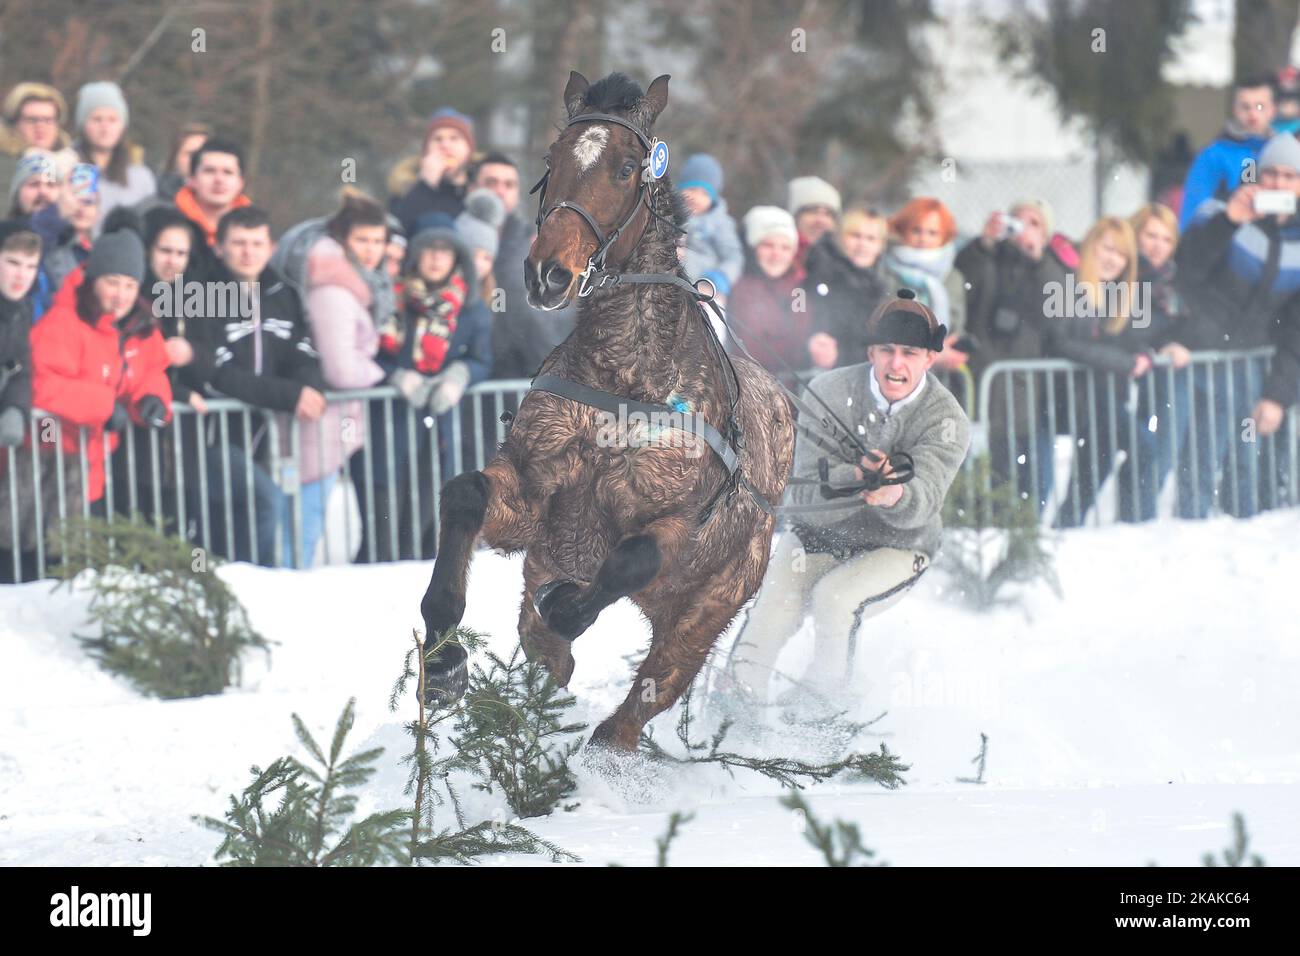 Kumoterki competitor in category skiring (skier behind a horse without rider) leaves th track, during the 2017 Edition of Kumoterki in Szaflary, near Zakopane. On Sunday, 22 January 2017, in Szaflary, near Zakopane, Poland. Photo by Artur Widak *** Please Use Credit from Credit Field ***  Stock Photo